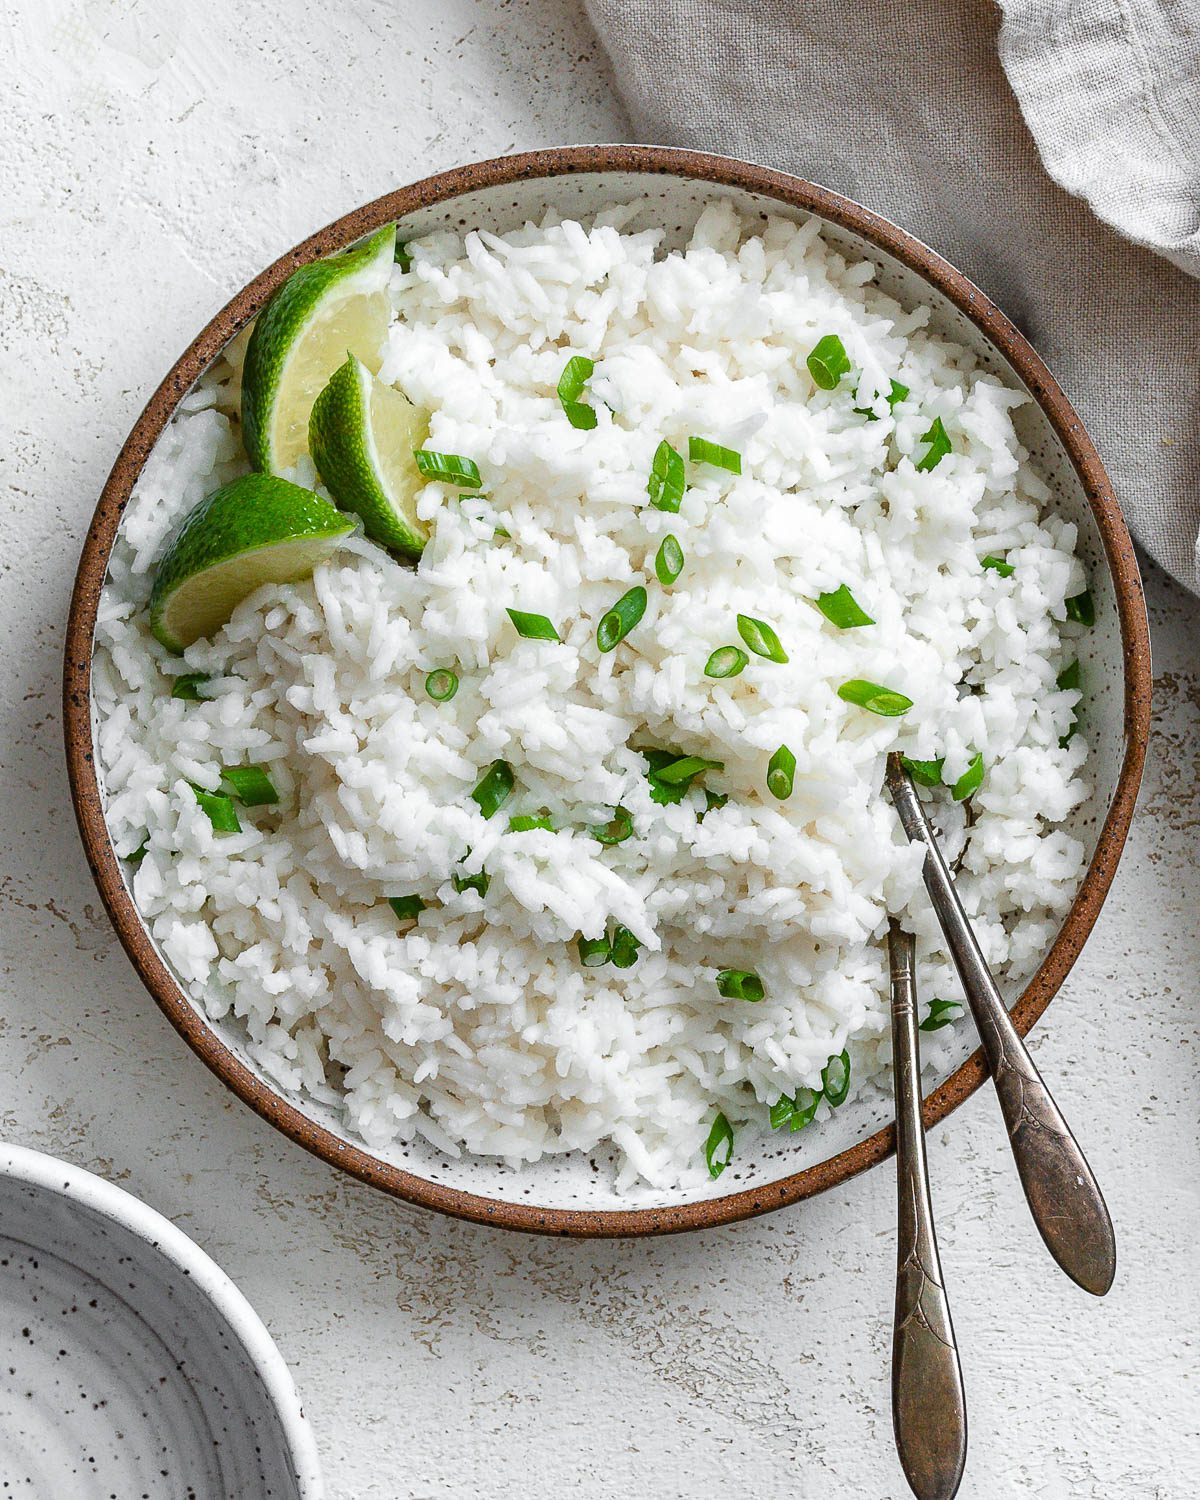 completed Coconut Basmati Rice plated in a bowl against a light background